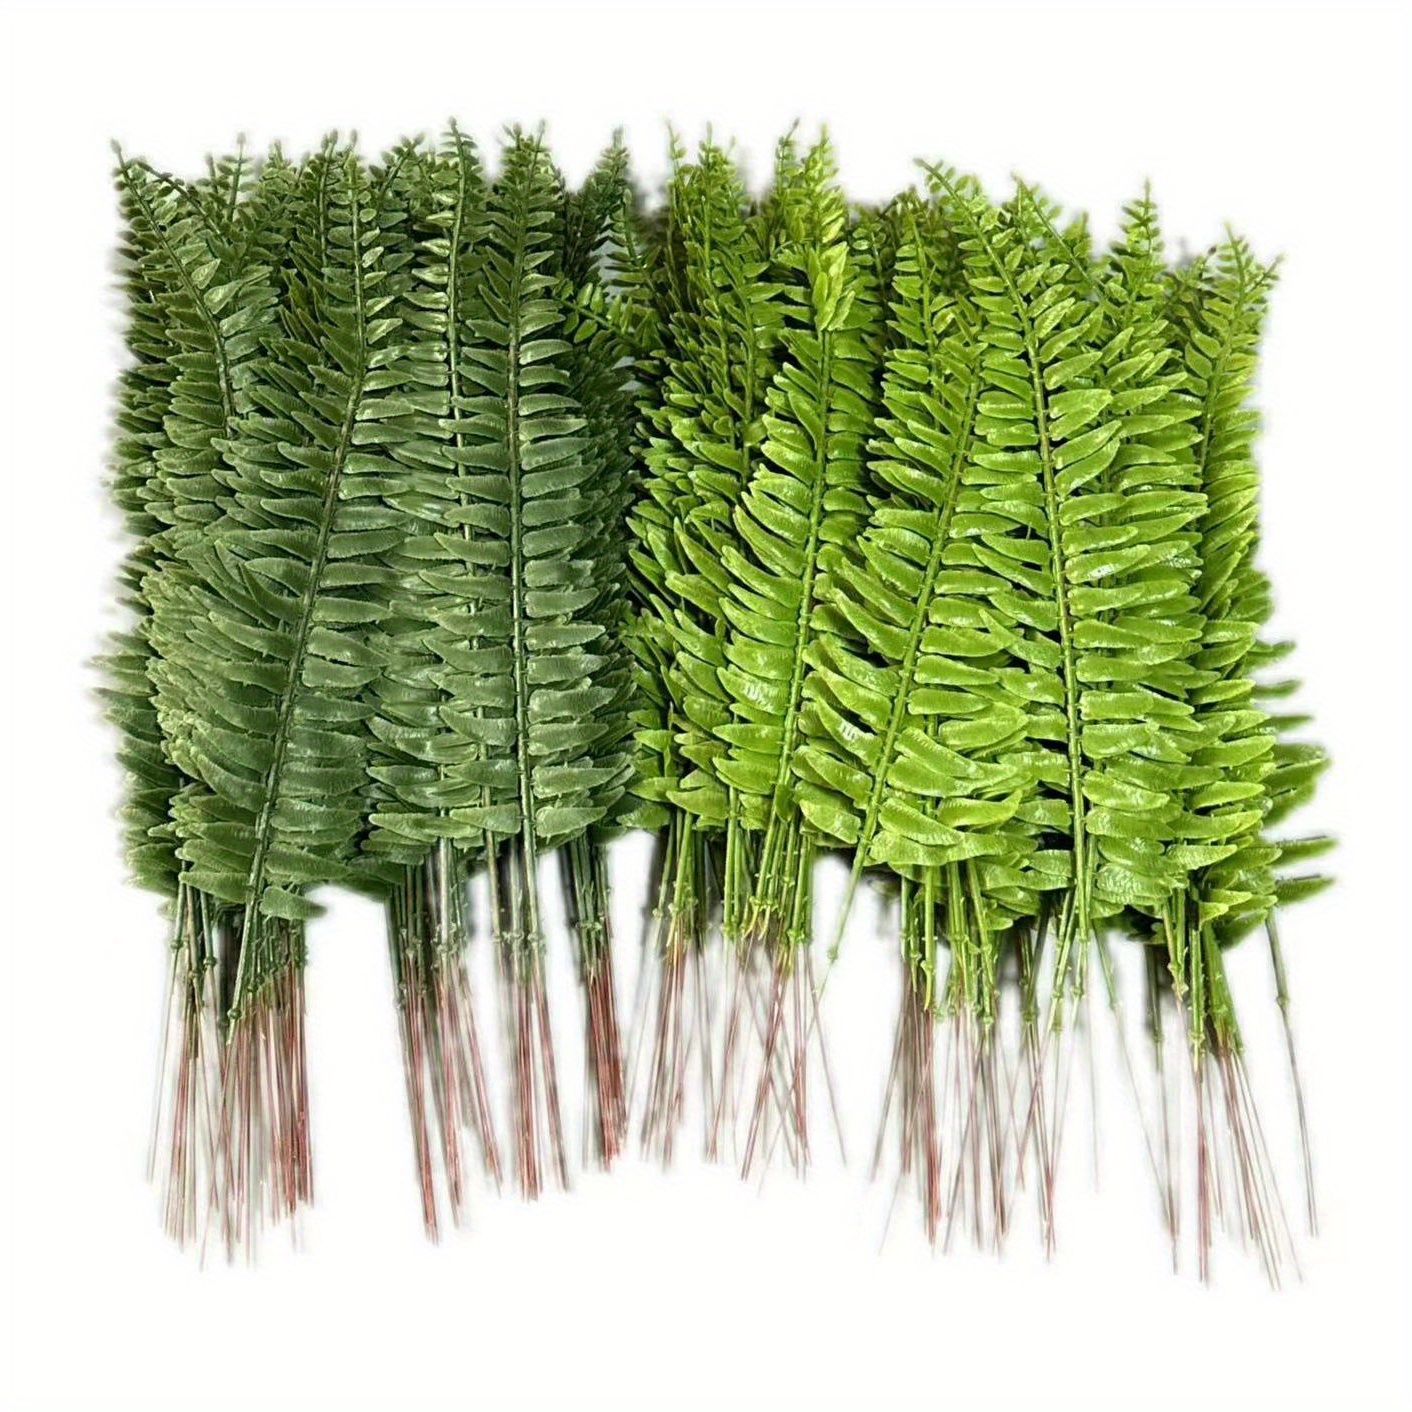 

24-piece Uv-resistant Artificial Ferns Set - Perfect For Diy Outdoor Decor, Window Boxes, Entryways & More - Ideal For St. Patrick's Day, Valentine's, Weddings